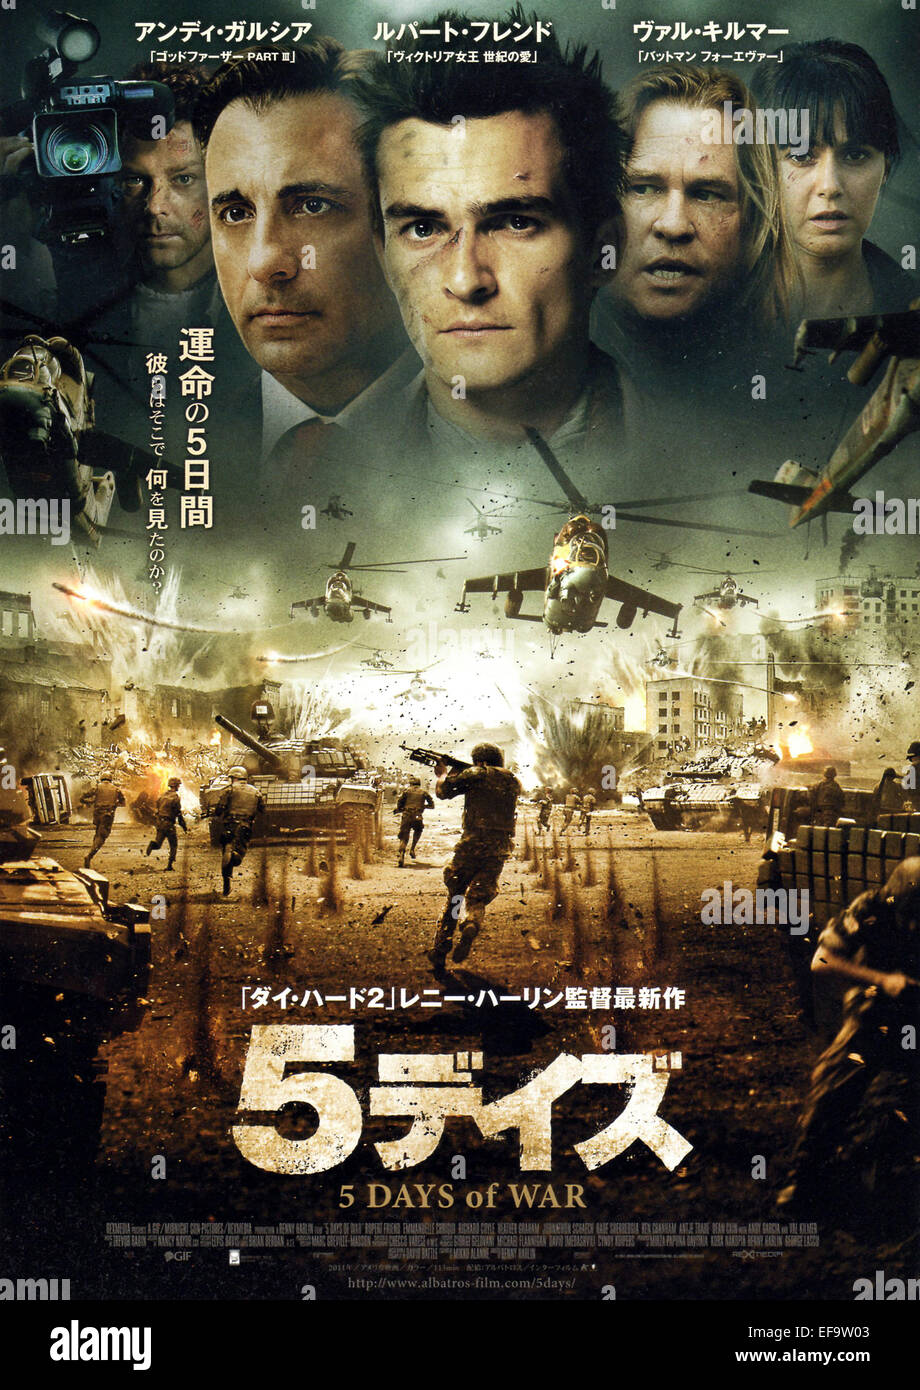 Download 5 Days Of War 2011 Full Hd Quality